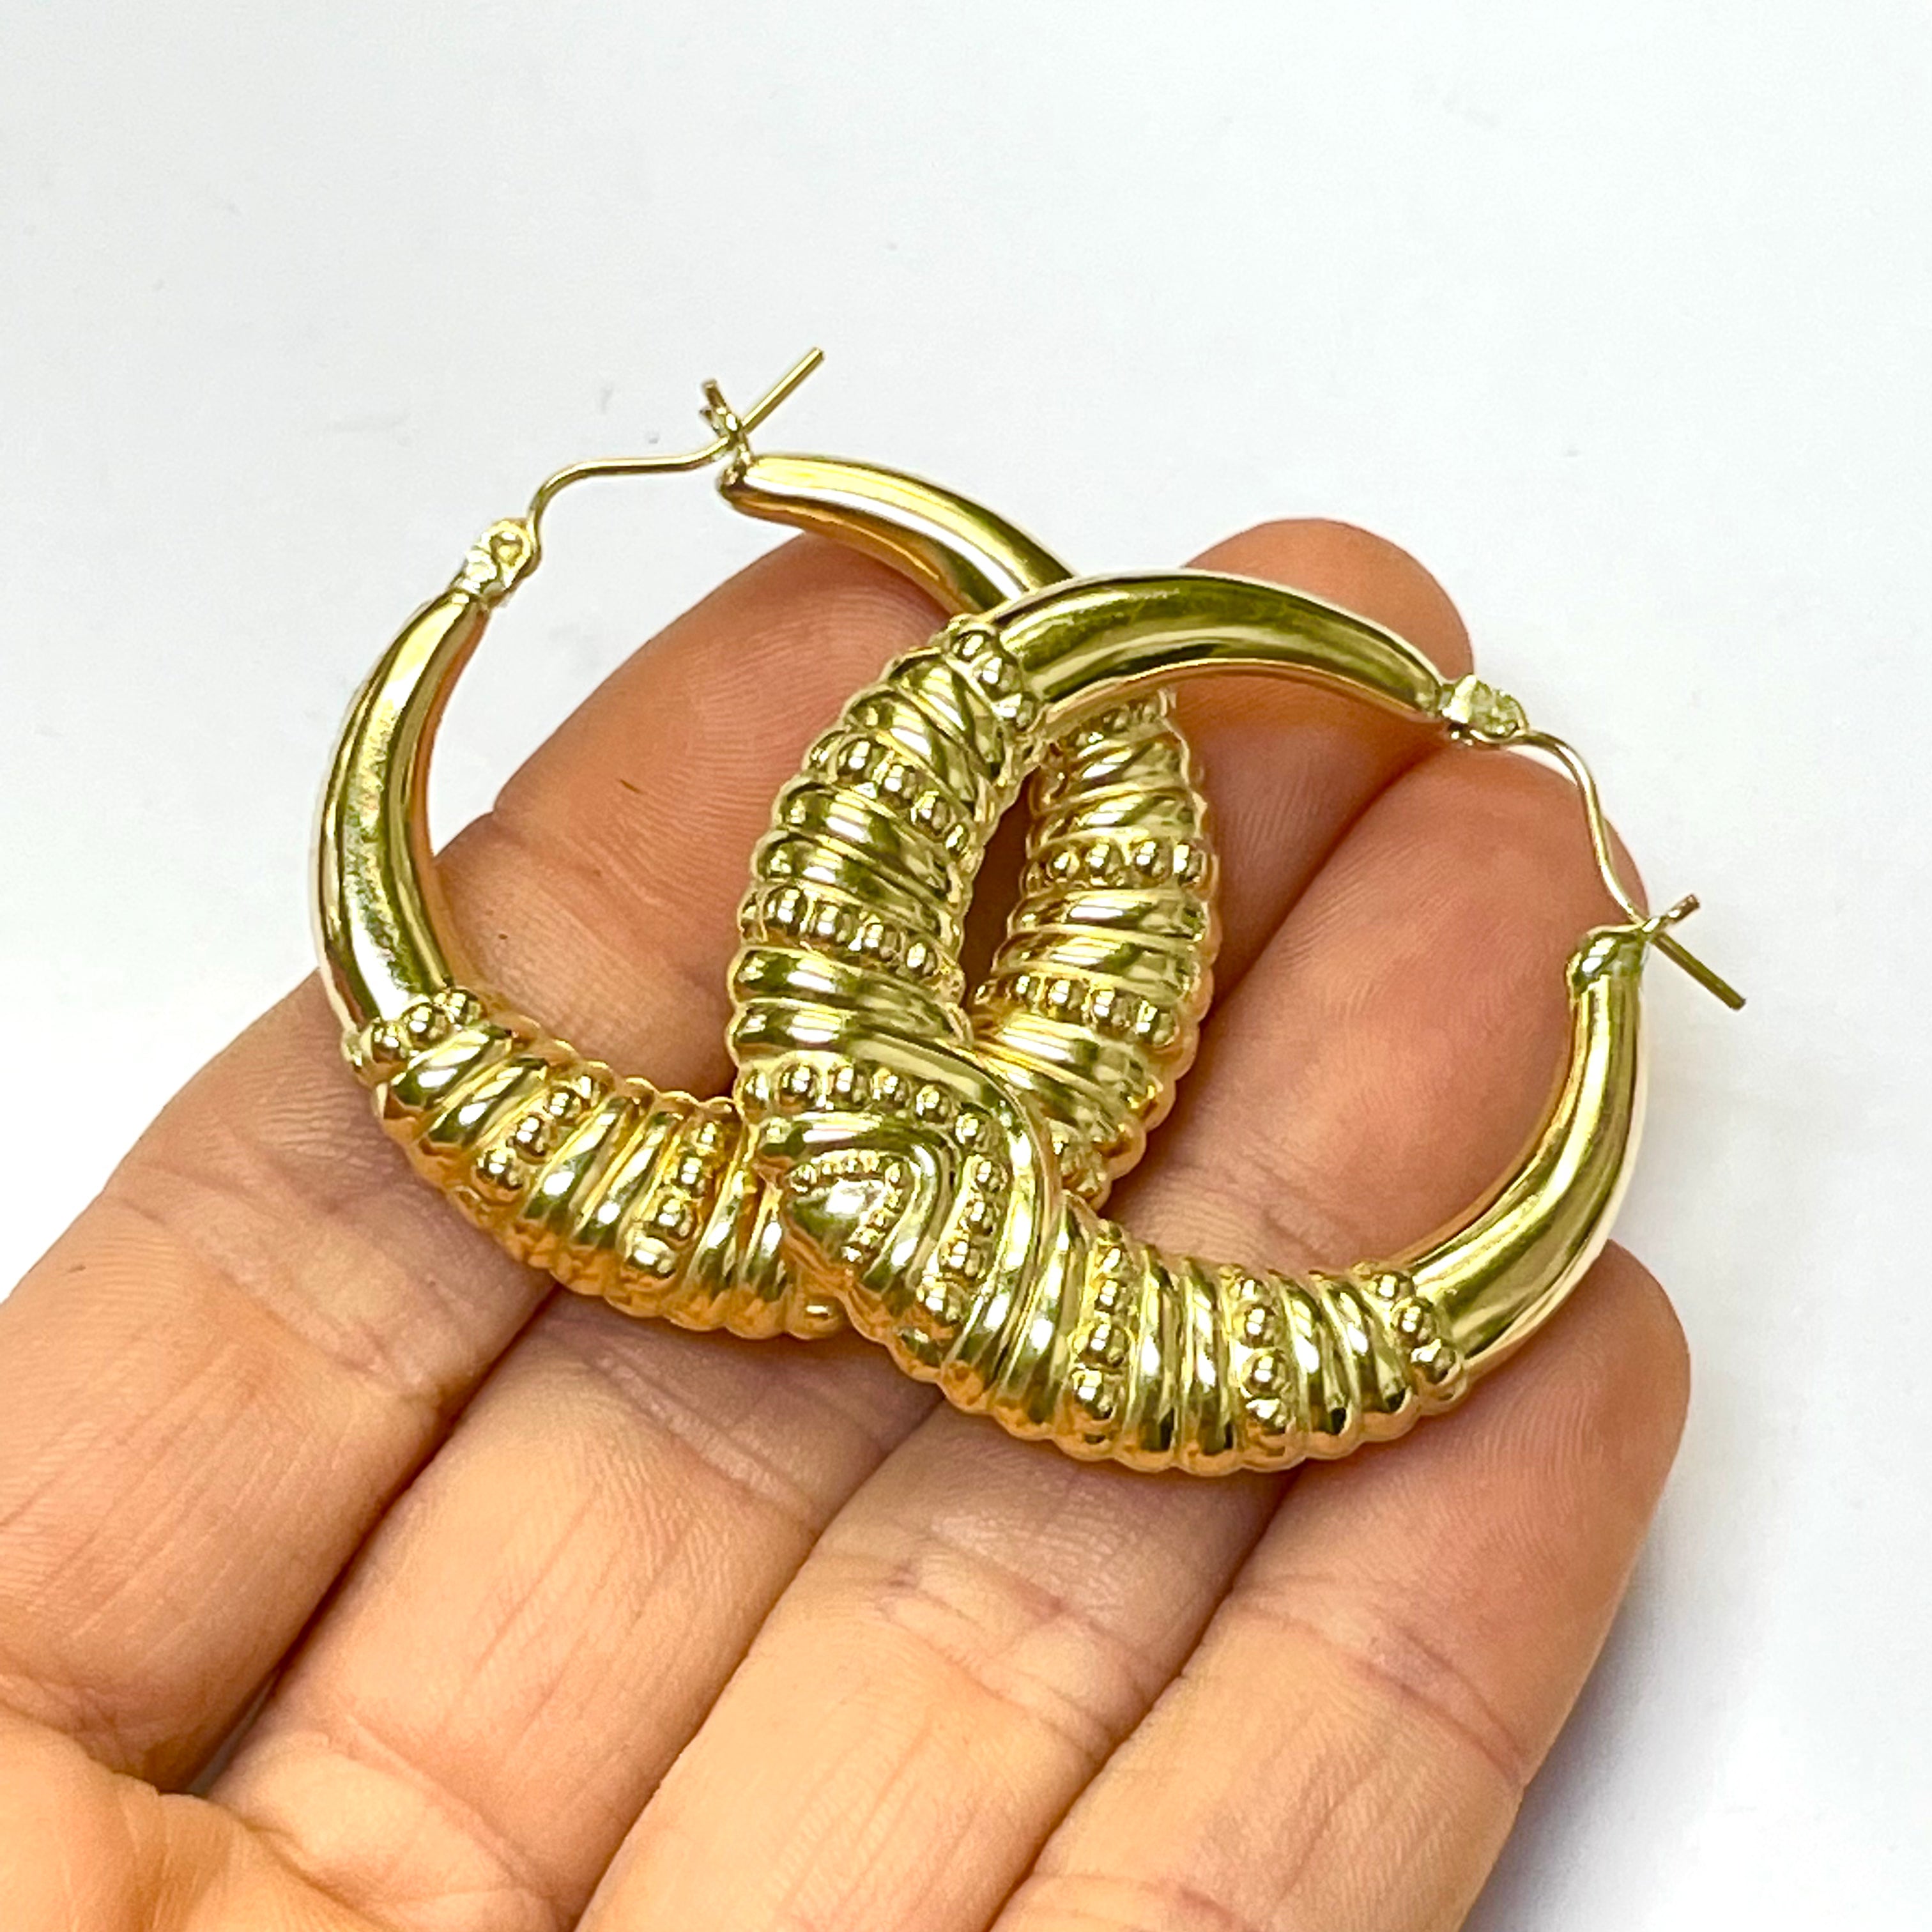 1.5” 10K Yellow Gold Ornate Puffy Tapered Hoop Earrings